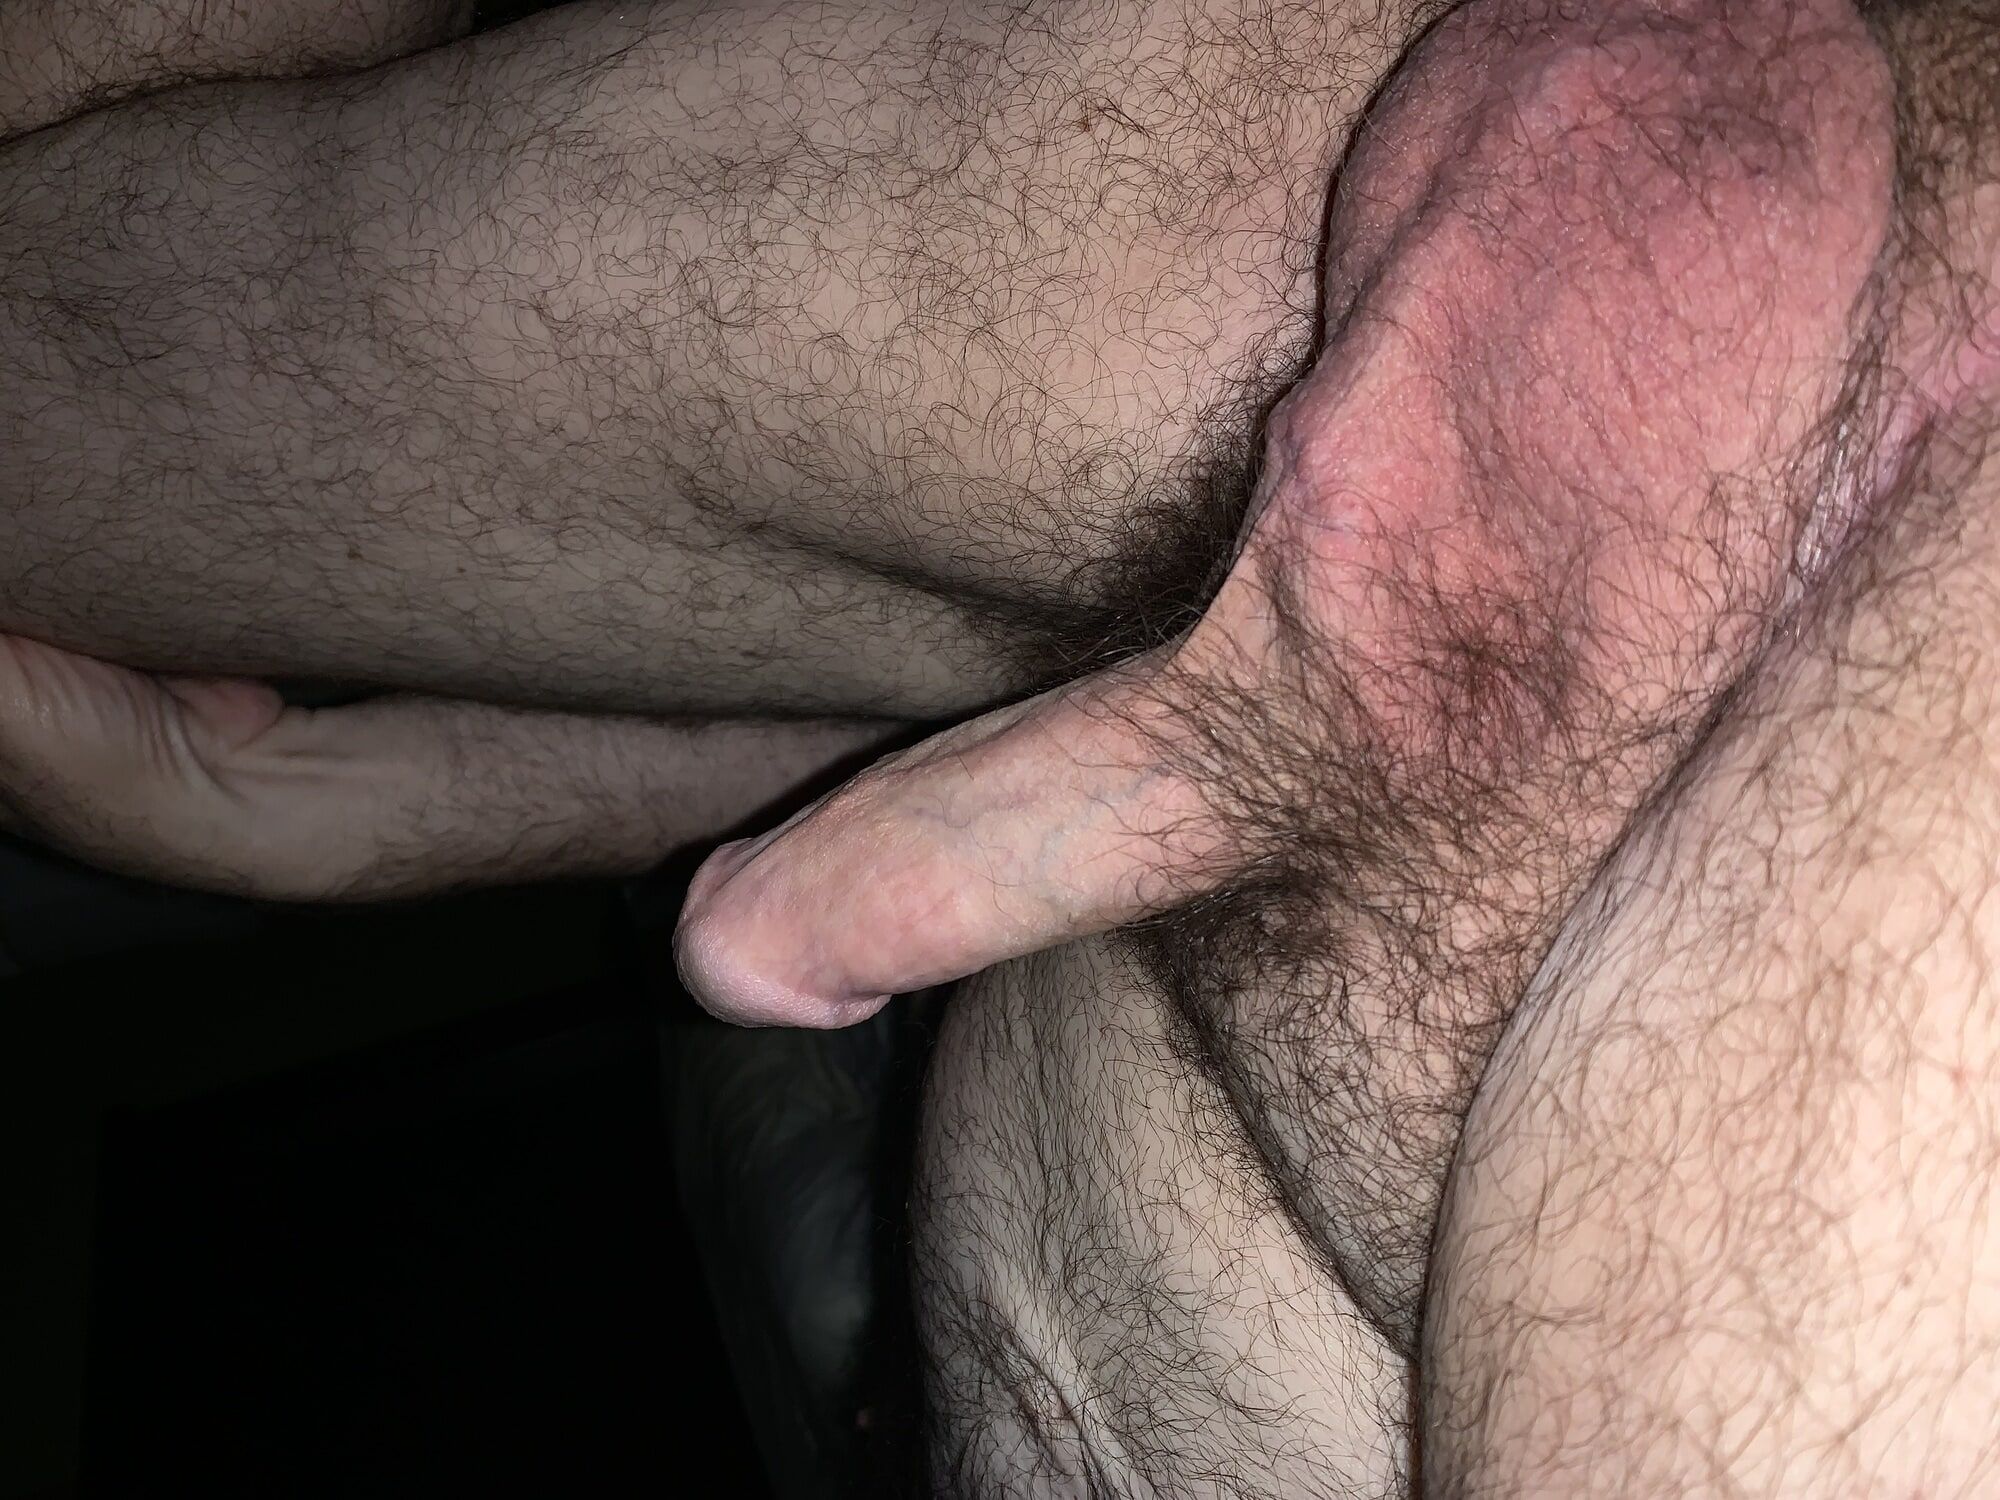 Jackmore1972’s gallery of his cock, part 2. #14